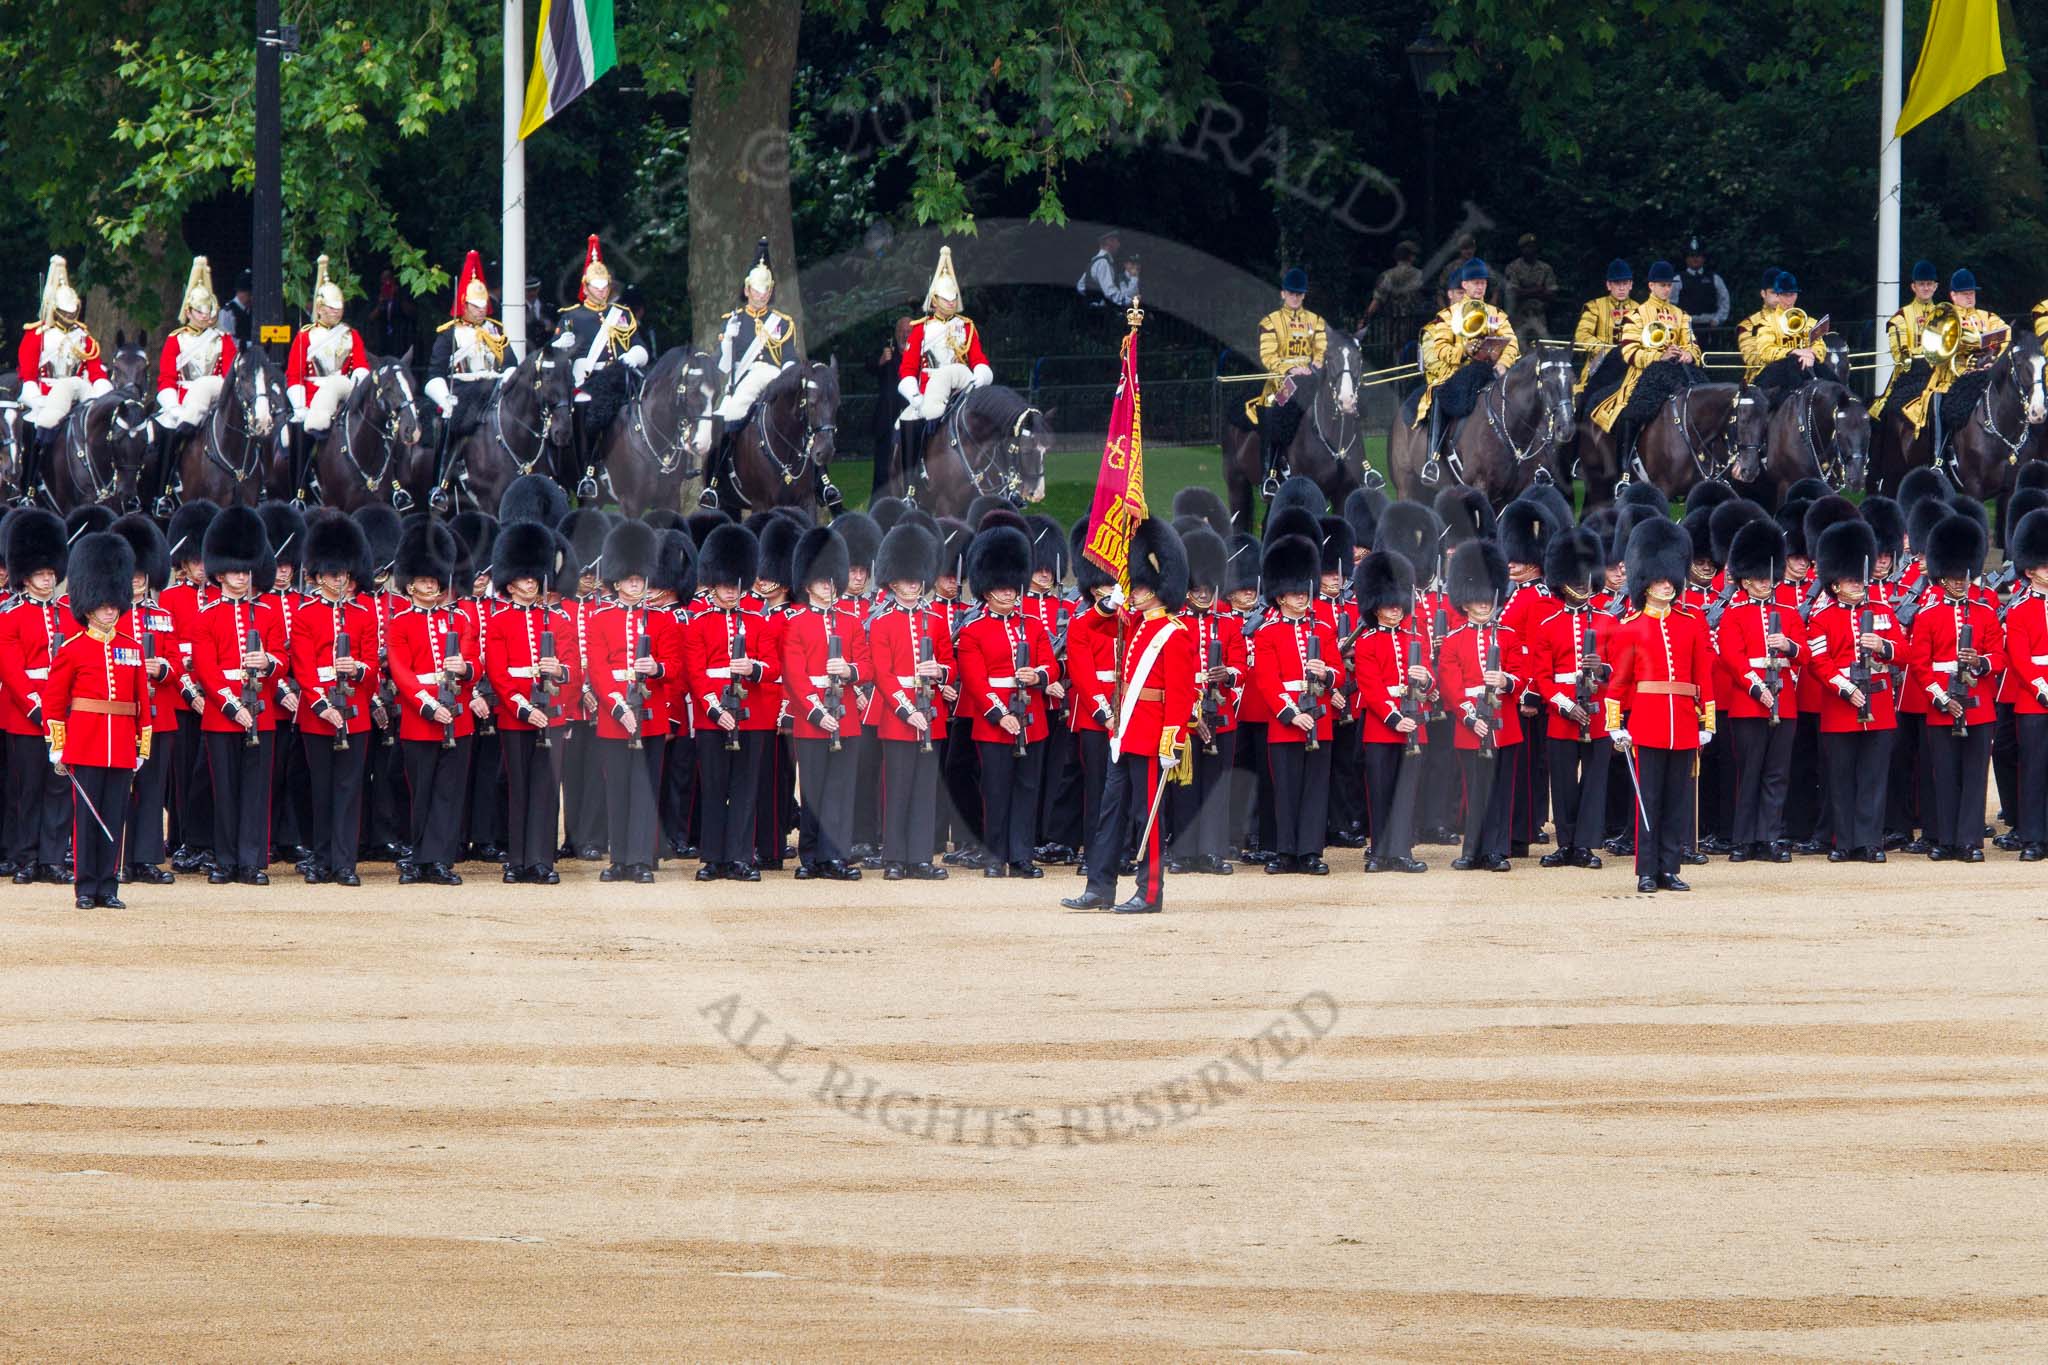 Trooping the Colour 2014.
Horse Guards Parade, Westminster,
London SW1A,

United Kingdom,
on 14 June 2014 at 11:27, image #569